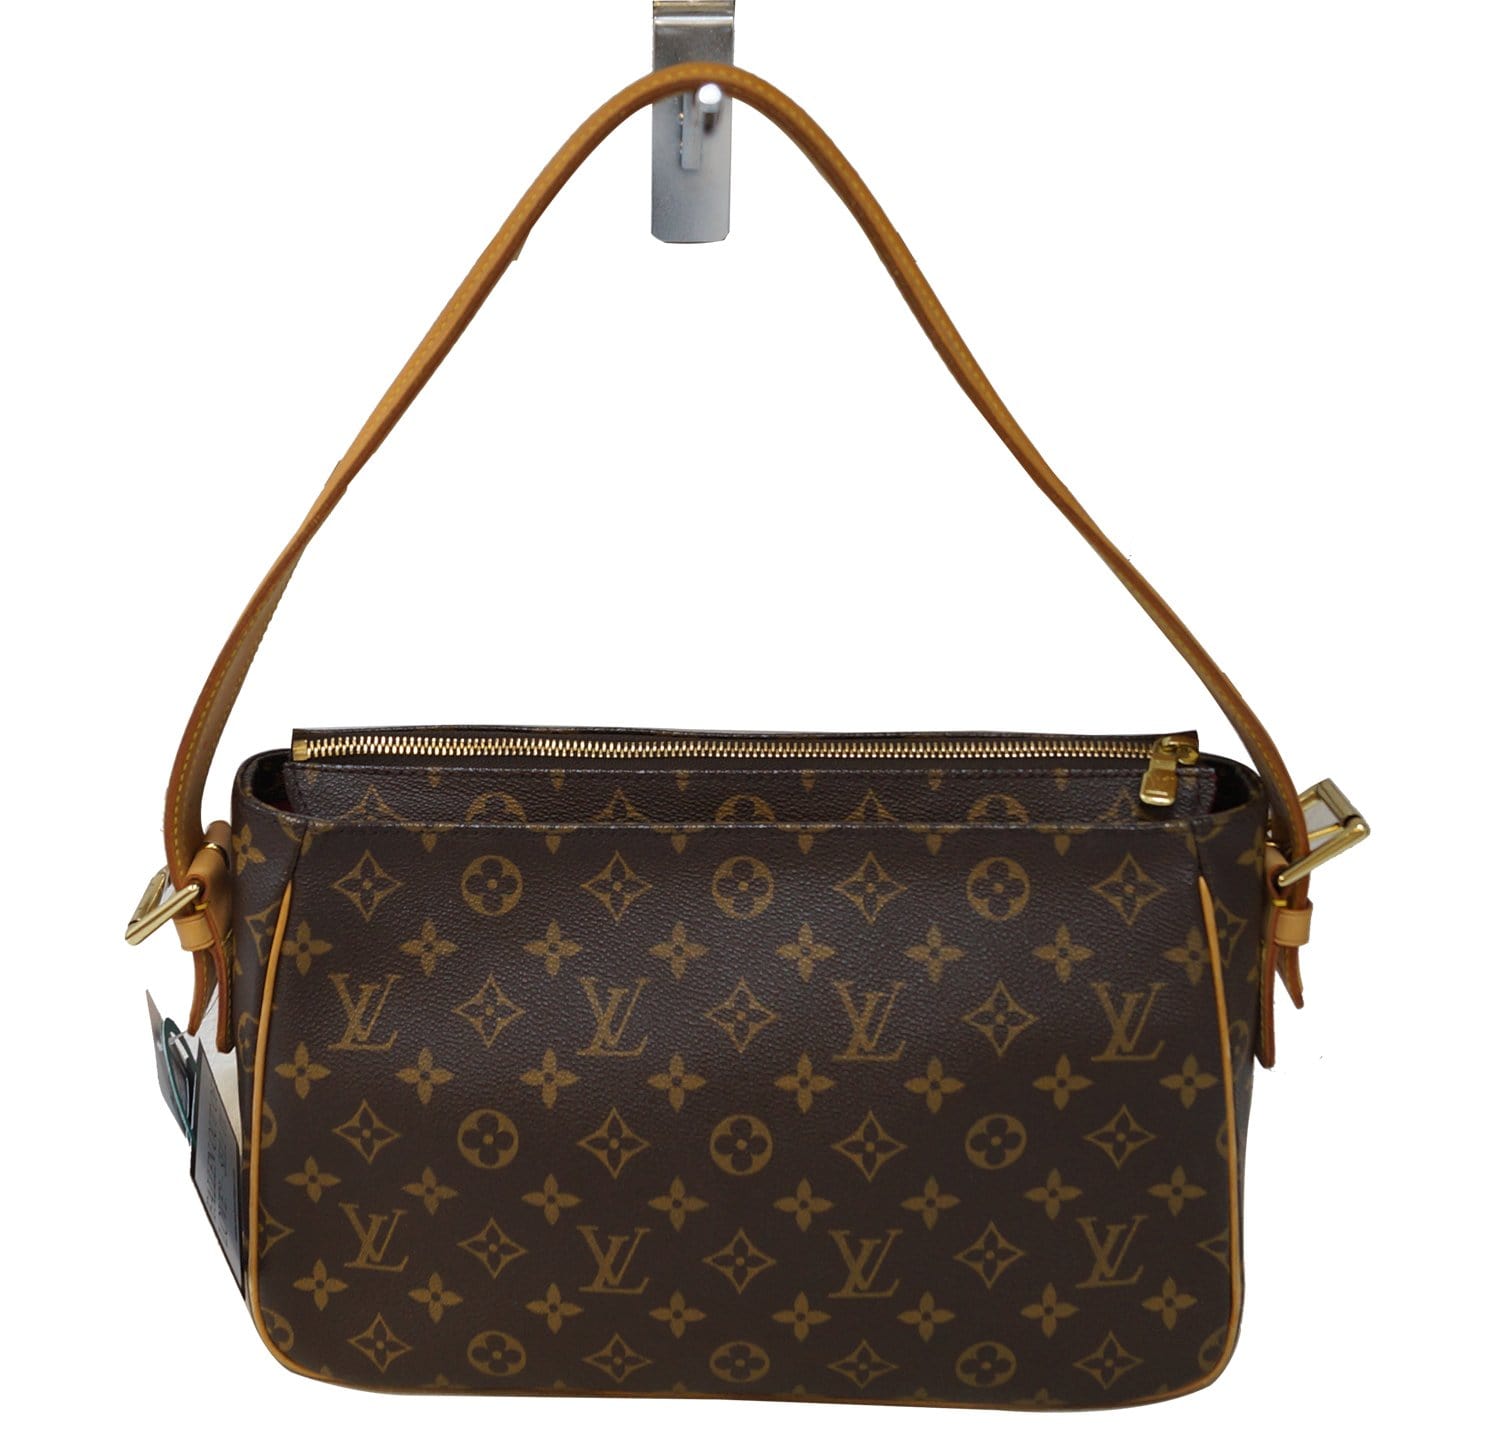 Shop for Louis Vuitton Monogram Canvas Leather Multipli Cite Bag - Shipped  from USA